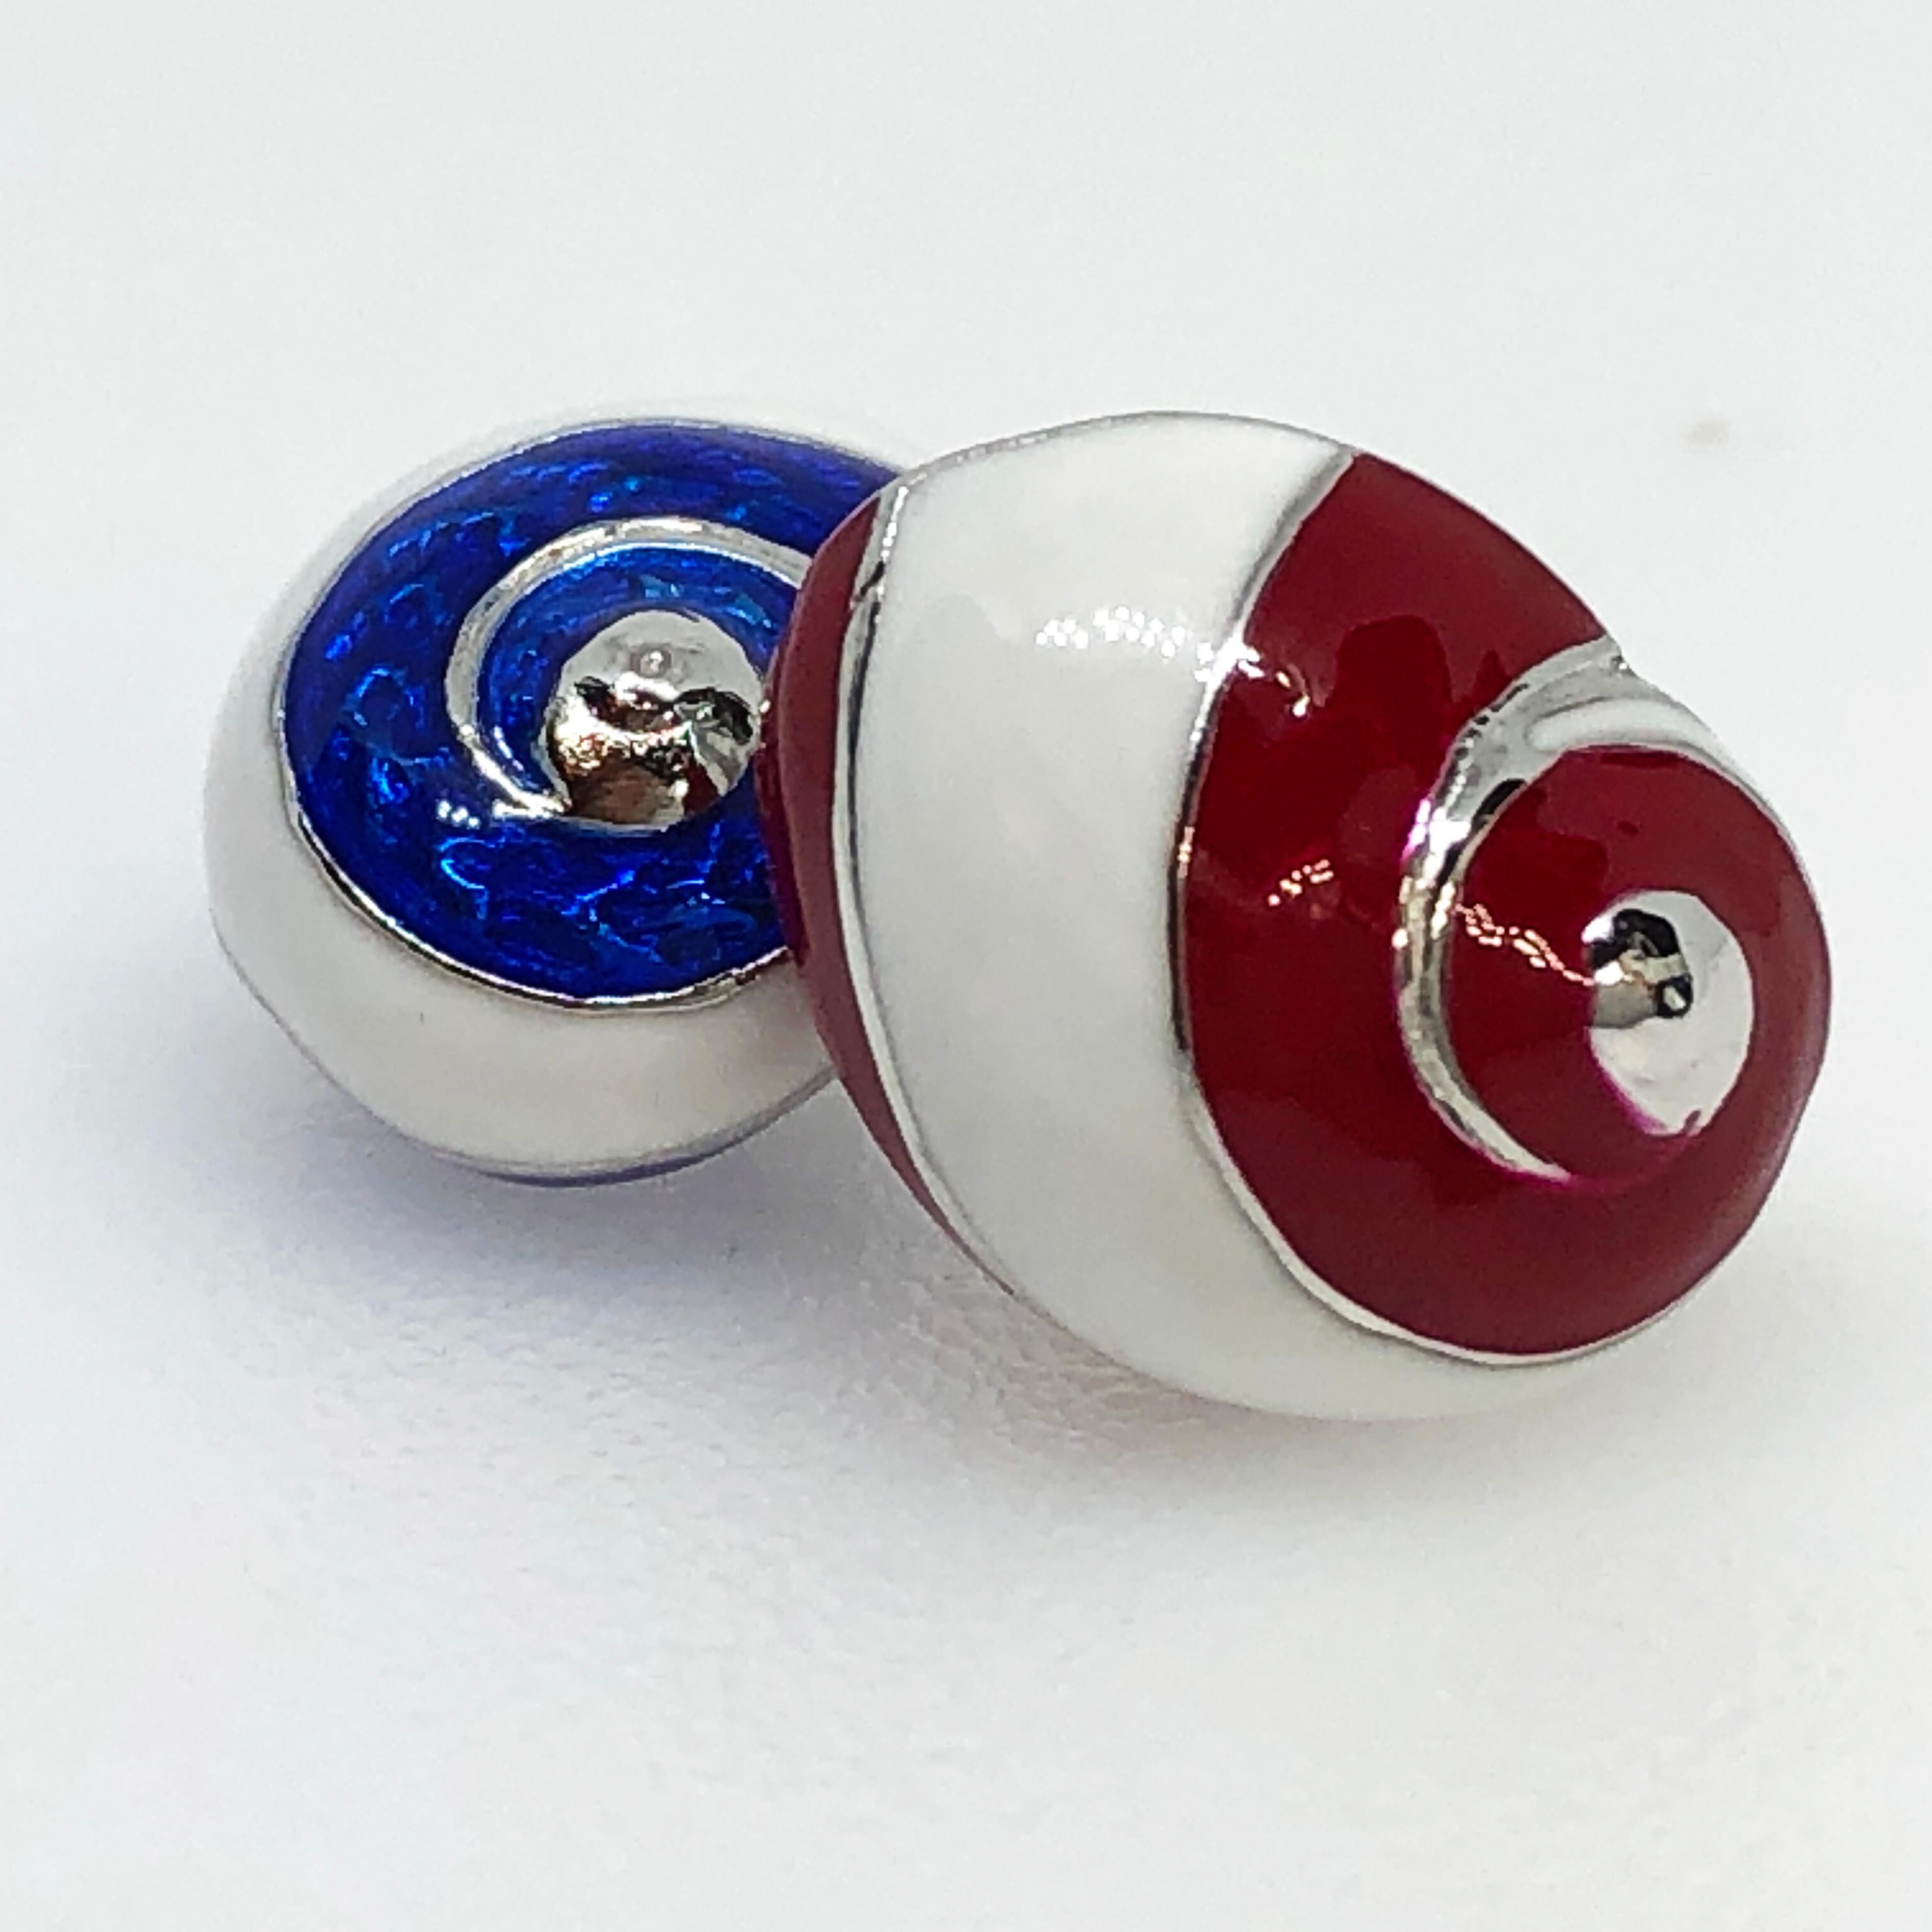 Berca White Red Blue Hand Enameled Seashell Shaped Sterling Silver Cufflinks 1